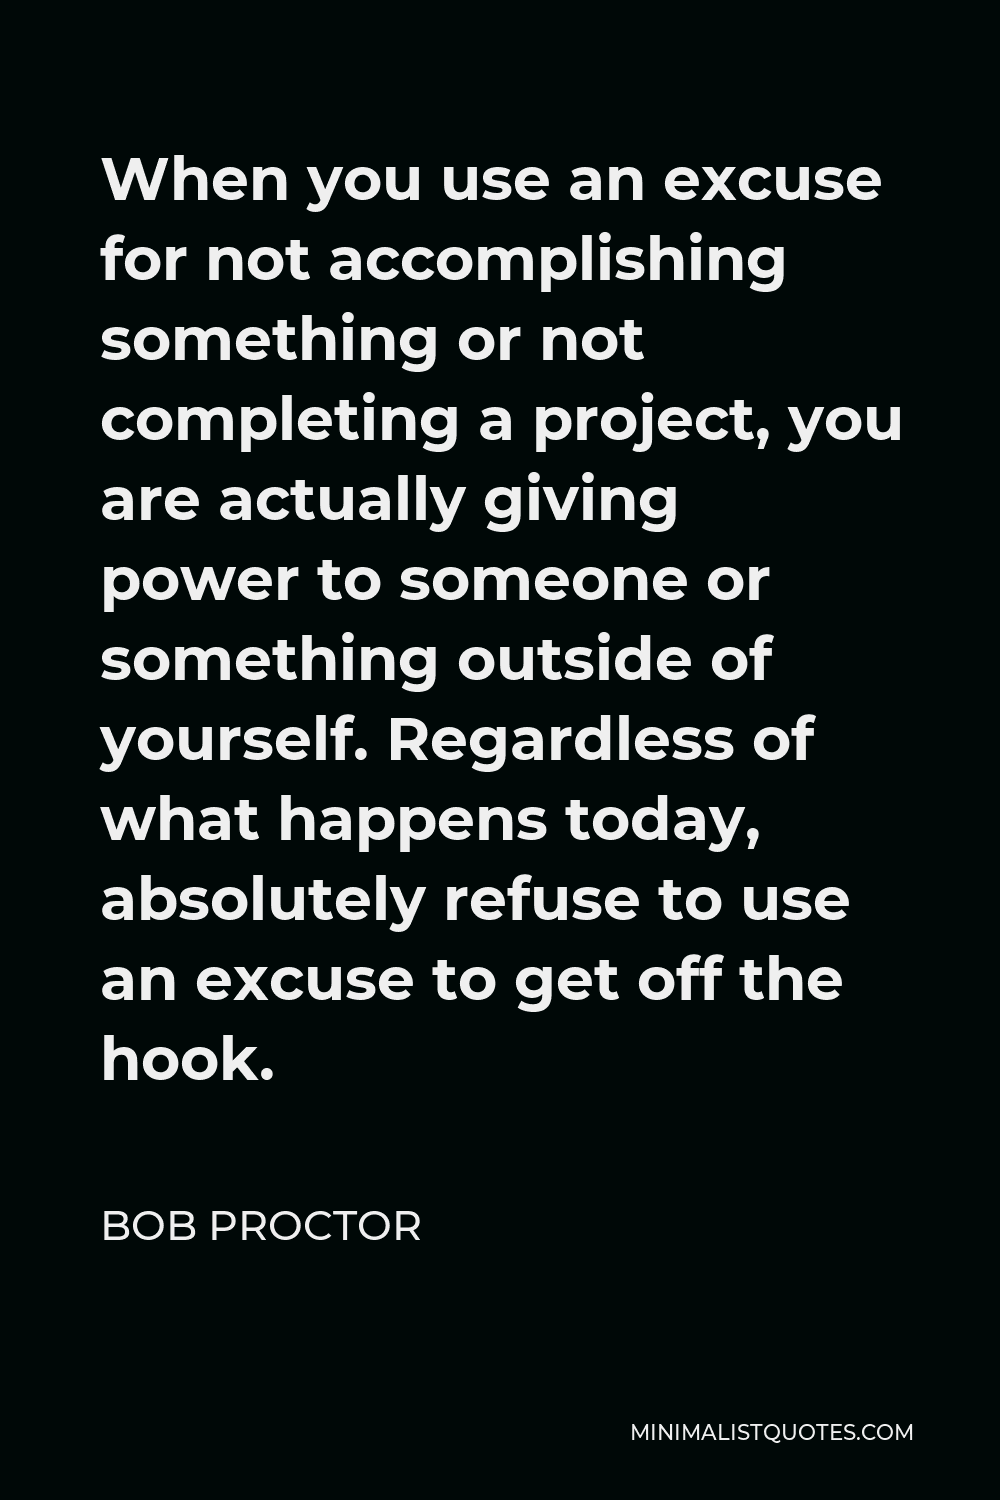 Bob Proctor Quote - When you use an excuse for not accomplishing something or not completing a project, you are actually giving power to someone or something outside of yourself. Regardless of what happens today, absolutely refuse to use an excuse to get off the hook.